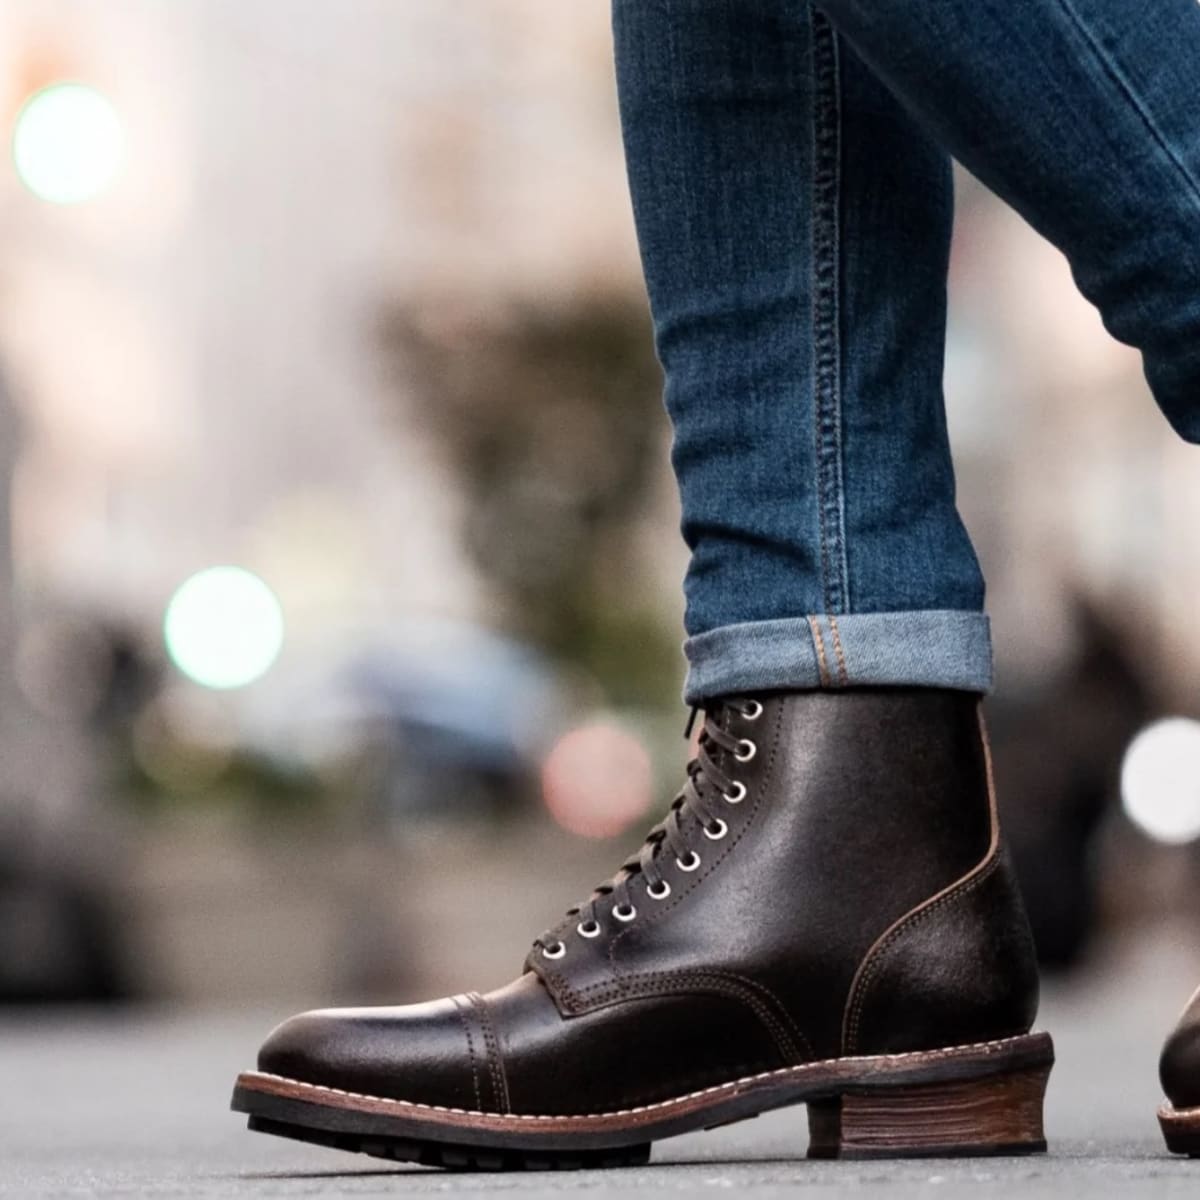 Best Heritage-Style Boots That Will Never Go Out of Style - Men's